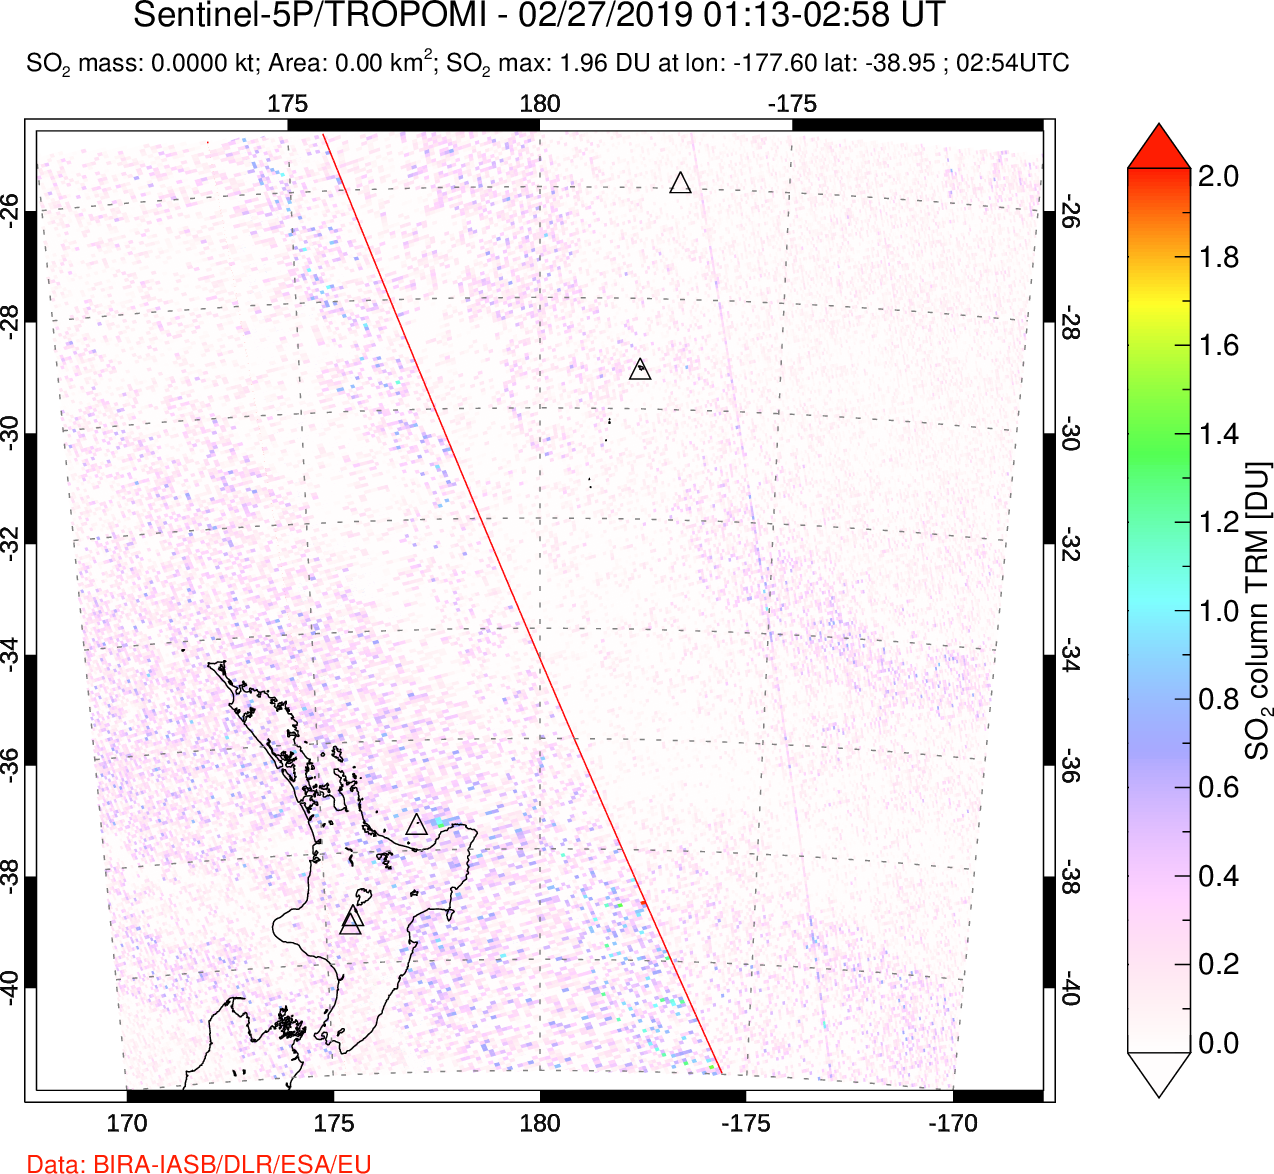 A sulfur dioxide image over New Zealand on Feb 27, 2019.